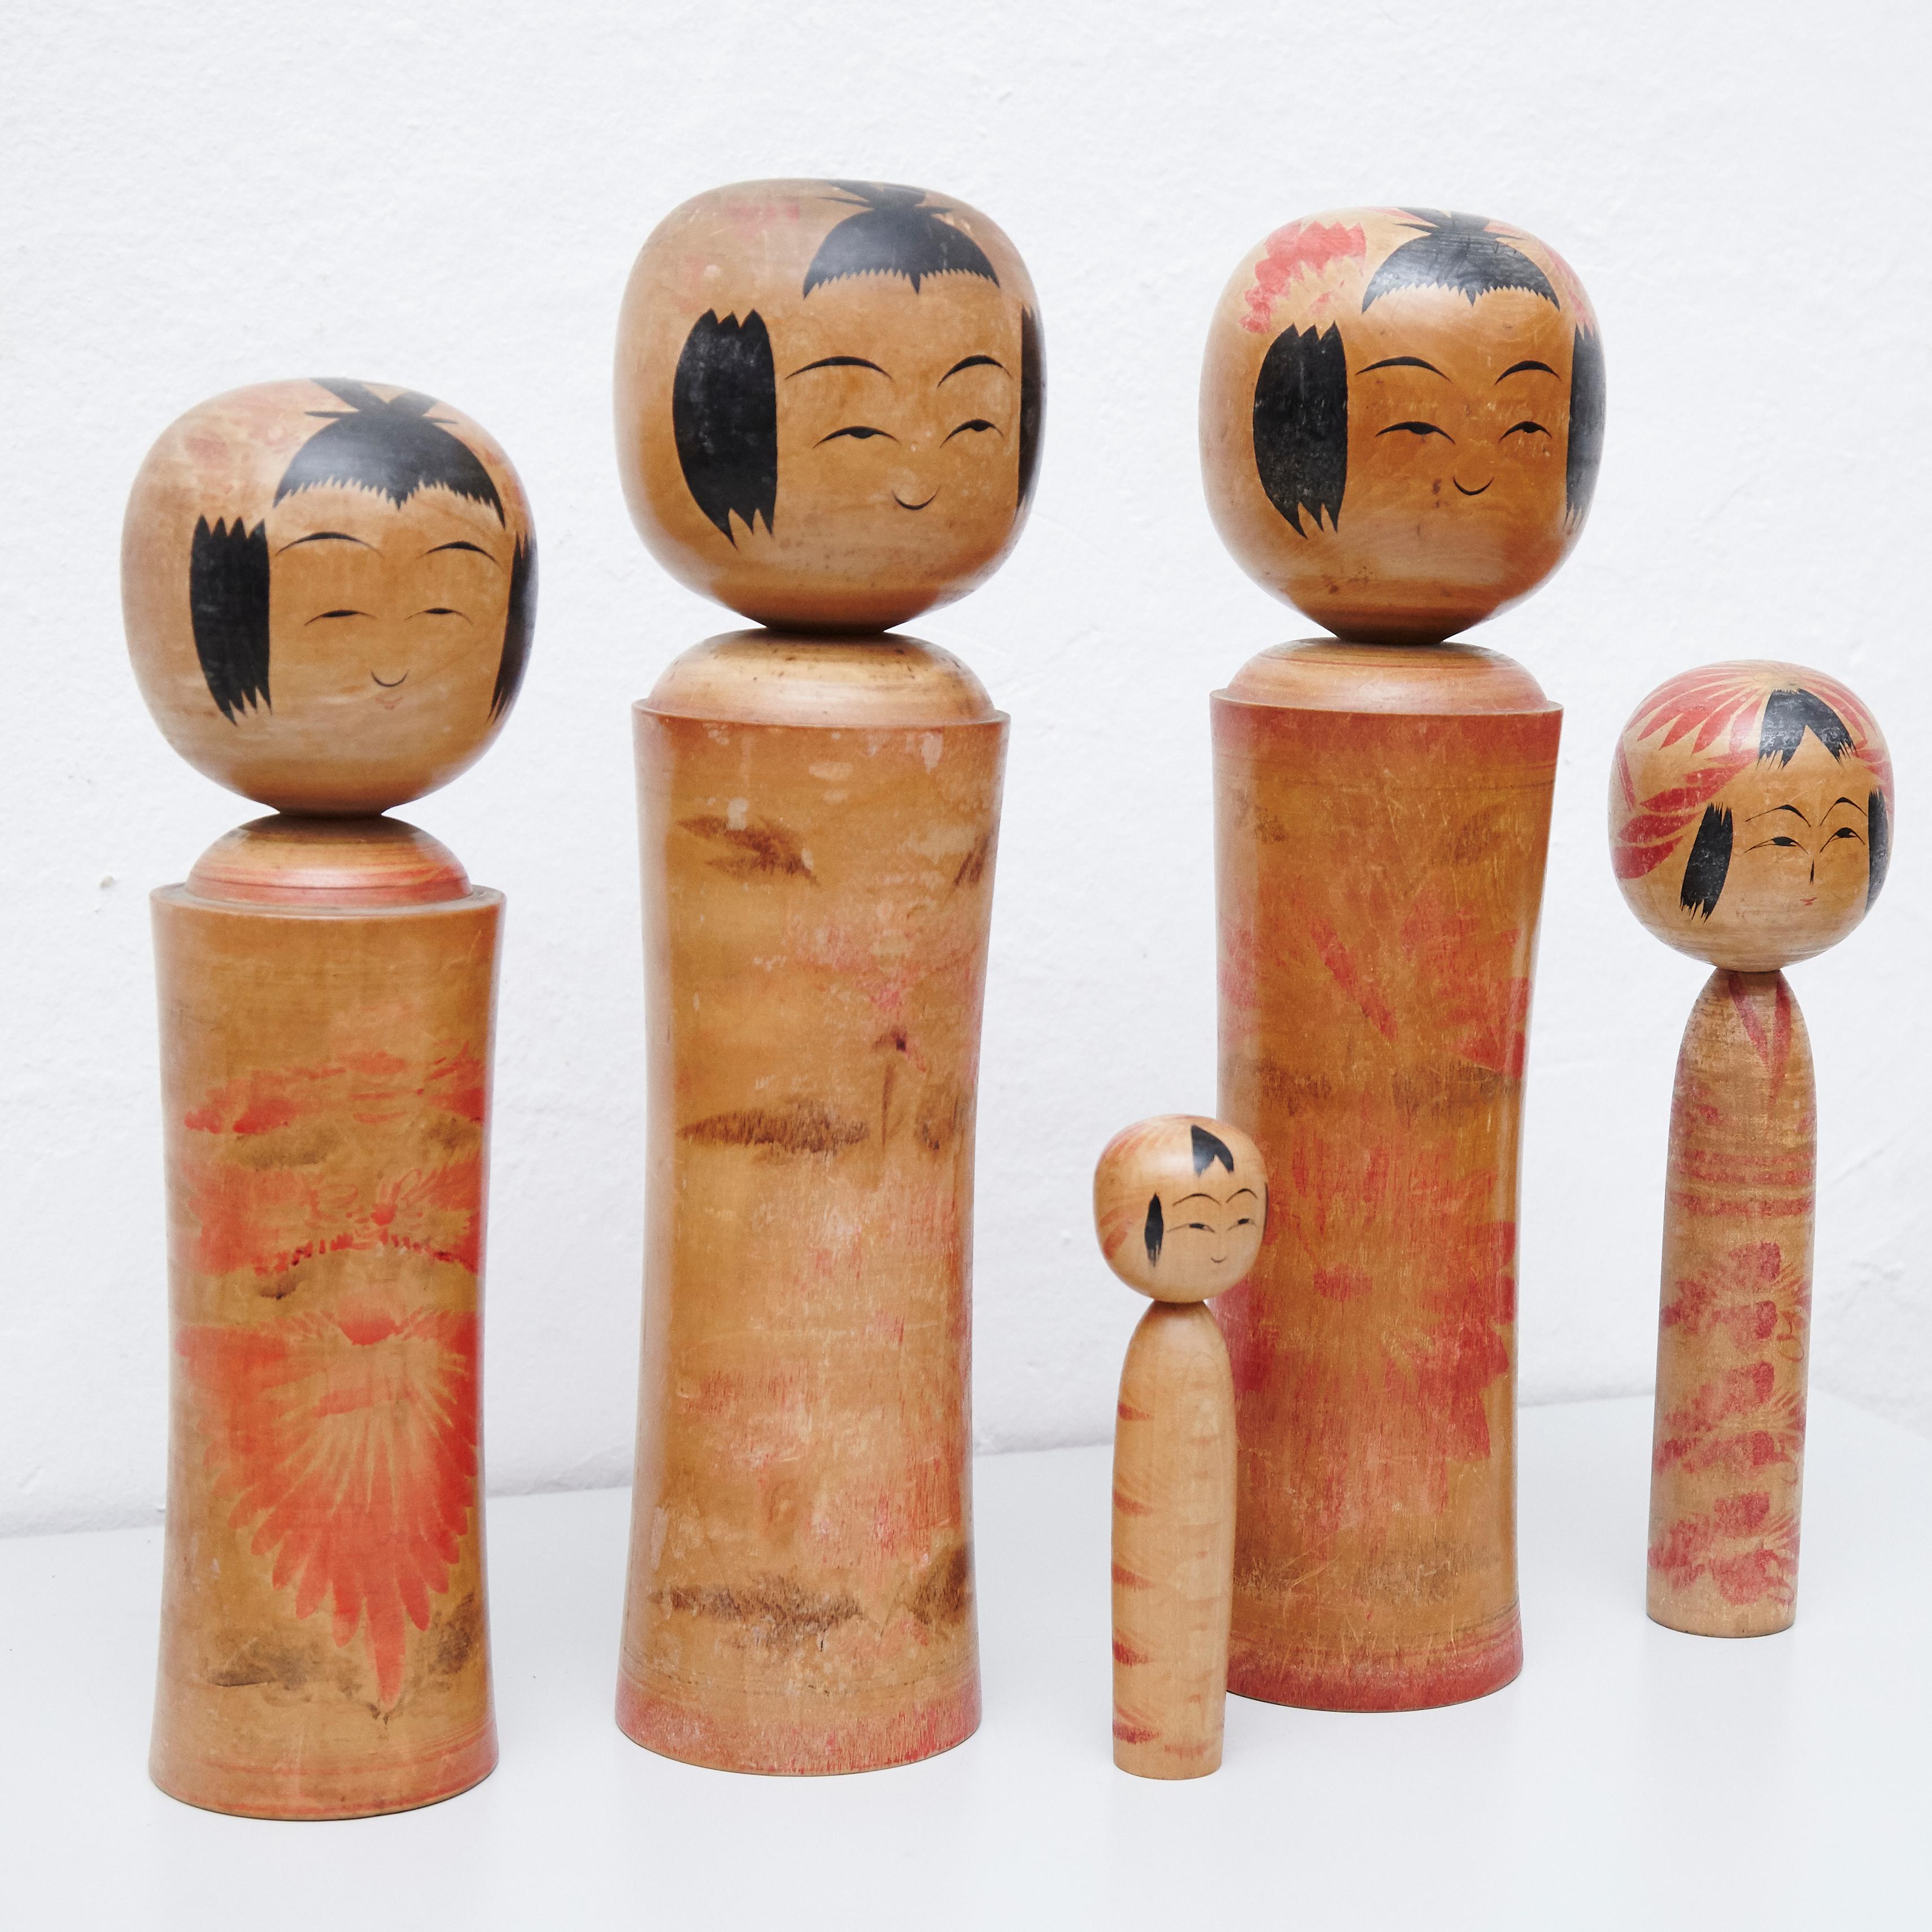 Japanese dolls called Kokeshi of the early 20th century.
Provenance from the northern Japan.
Set of 5.

Measures: 

36,5 x 10 cm
18 x 4,5 cm
30 x 9 cm
42 x 10 cm
42 x 10,5 cm


Handmade by Japanese artisants from wood. Have a simple